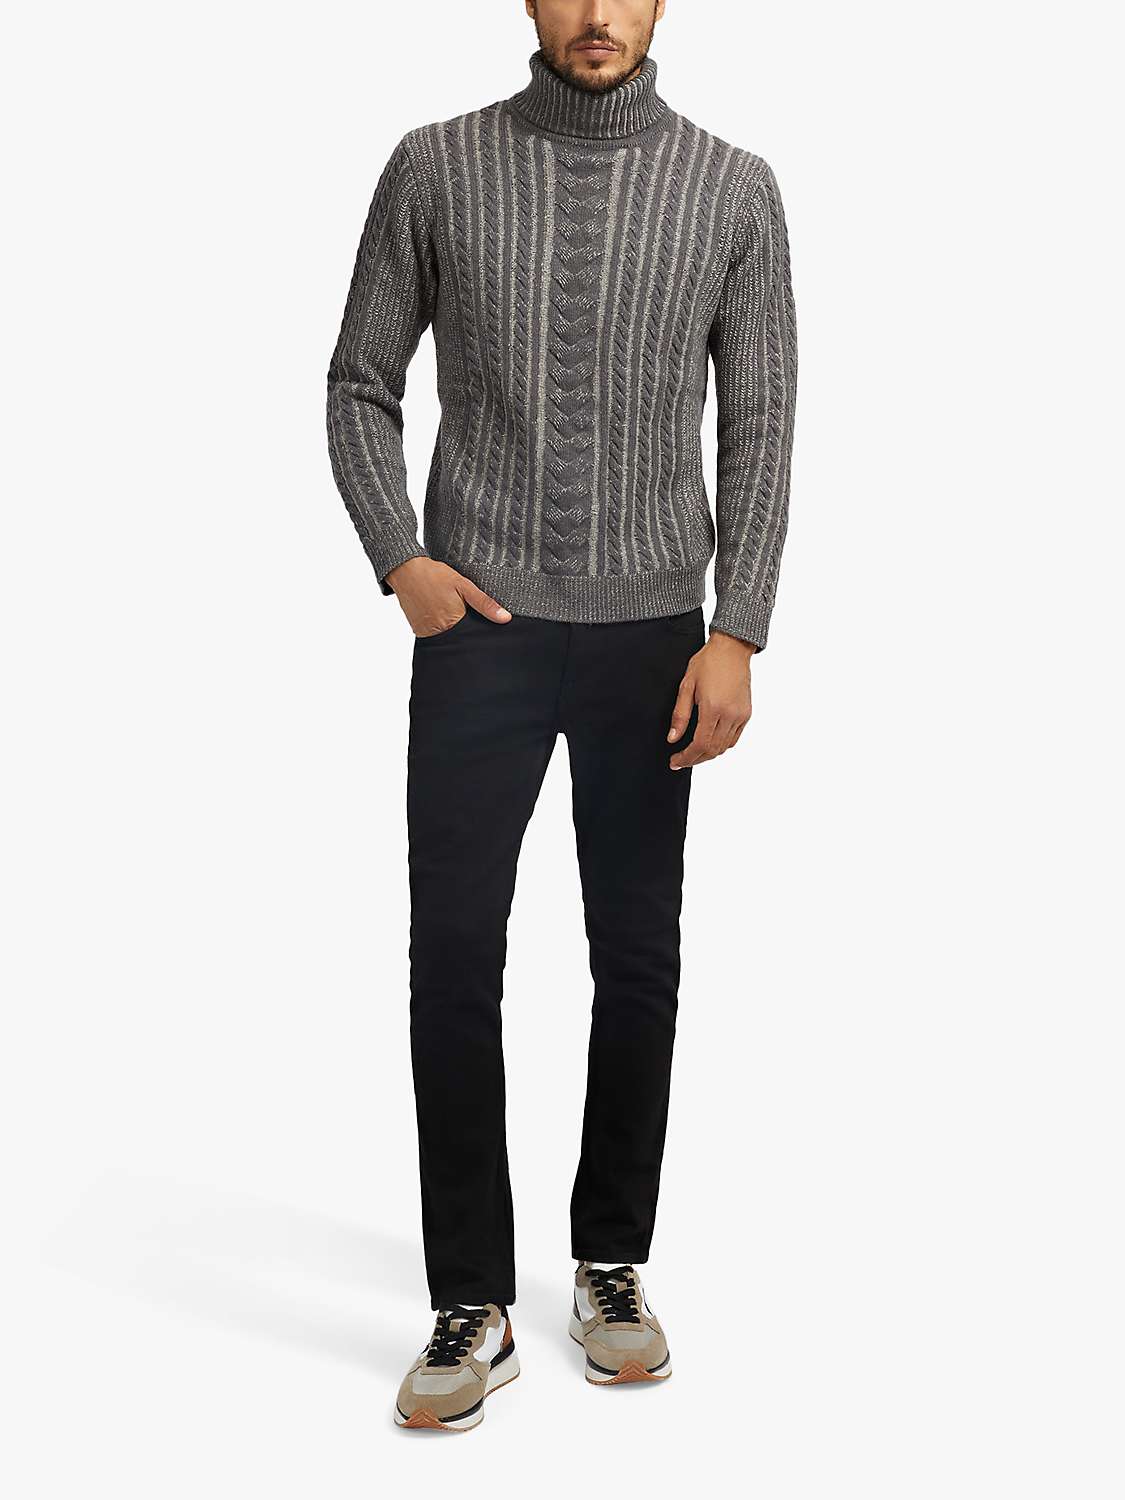 Buy GUESS Miami Skinny Fit Jeans, Carry Black Online at johnlewis.com